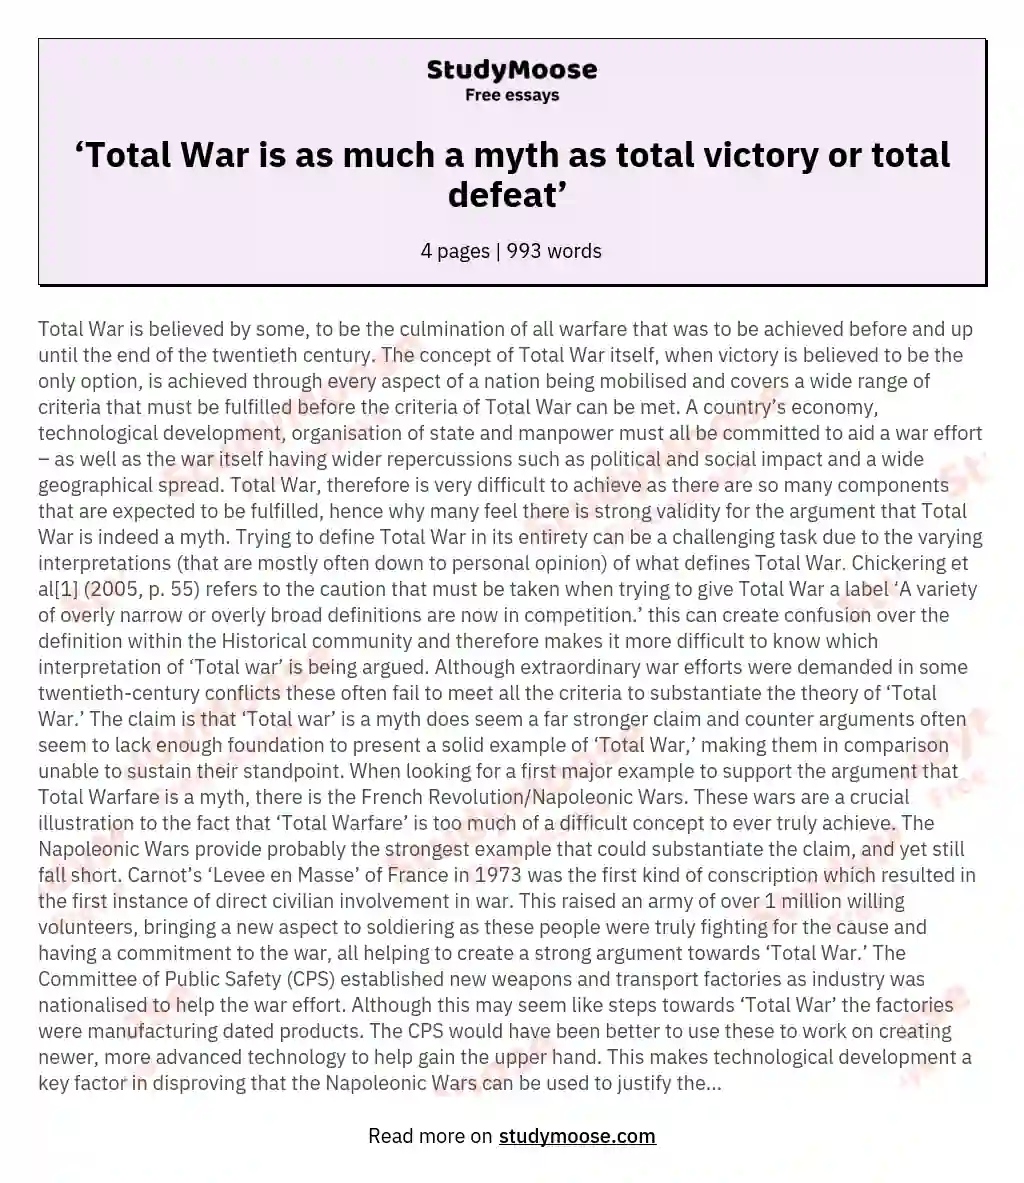 ‘Total War is as much a myth as total victory or total defeat’  essay